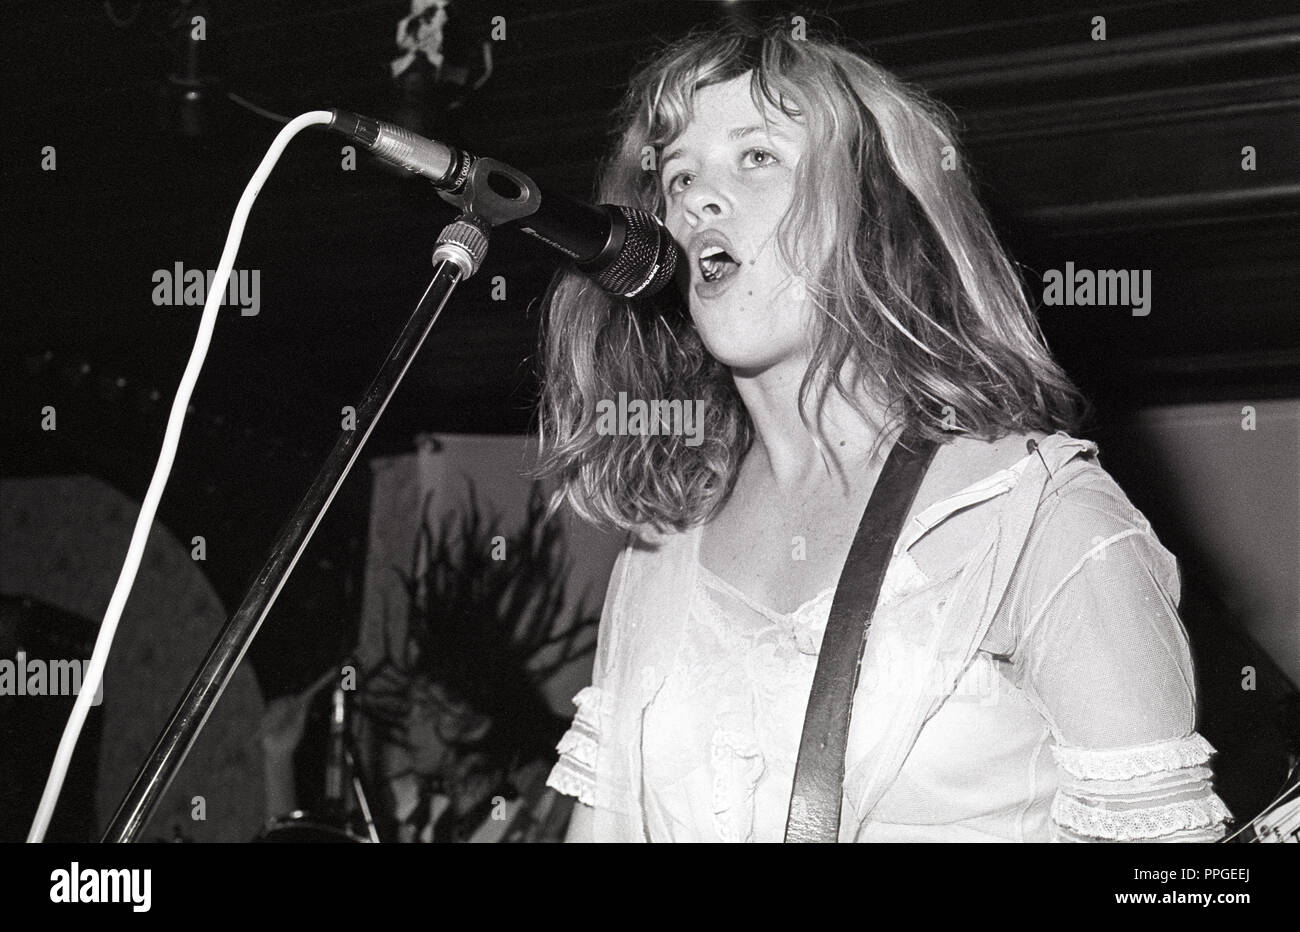 Babes in Toyland at Bedford Esquires, 05/10/1990. Stock Photo